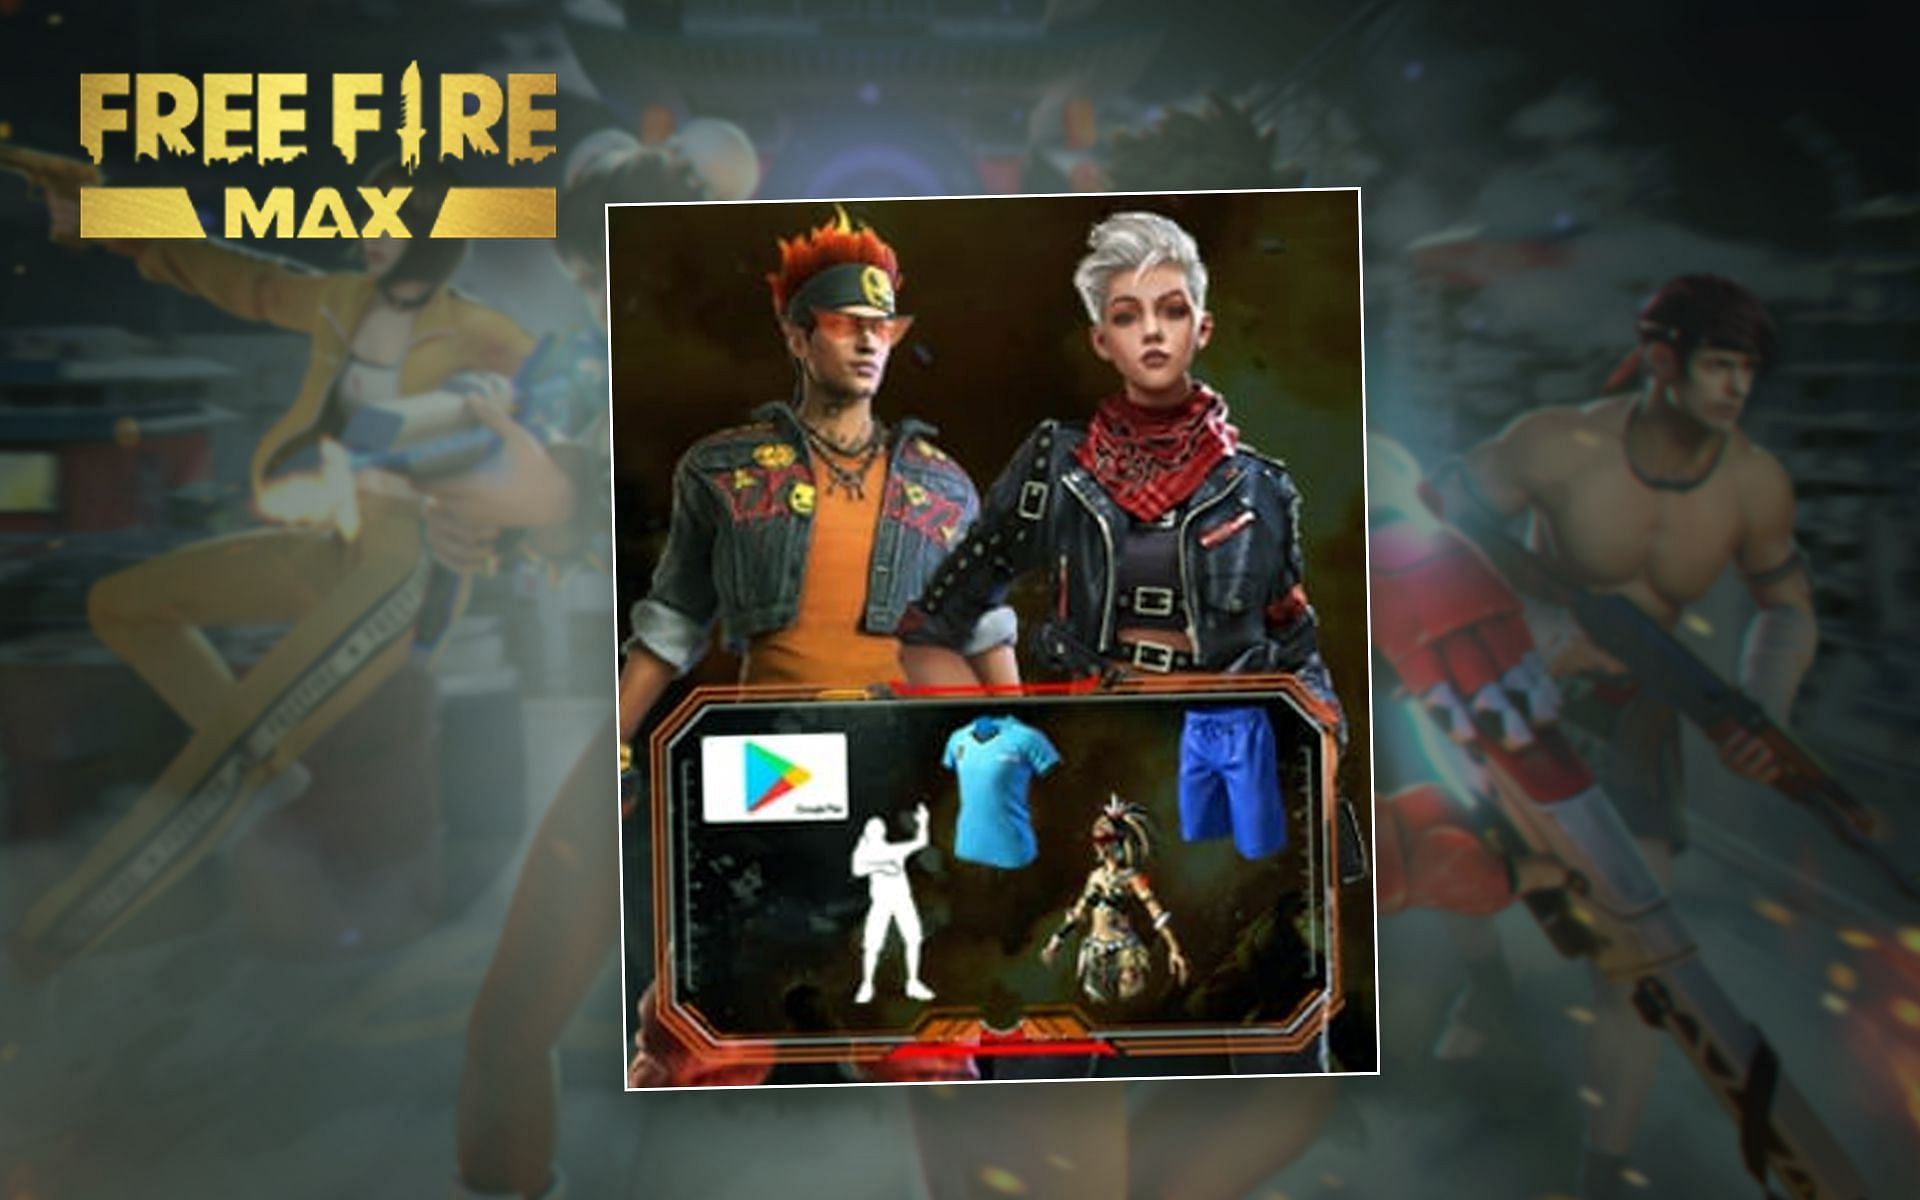 Rewards being offered by the Watch to Win event in Free Fire MAX (Image via Sportskeeda)